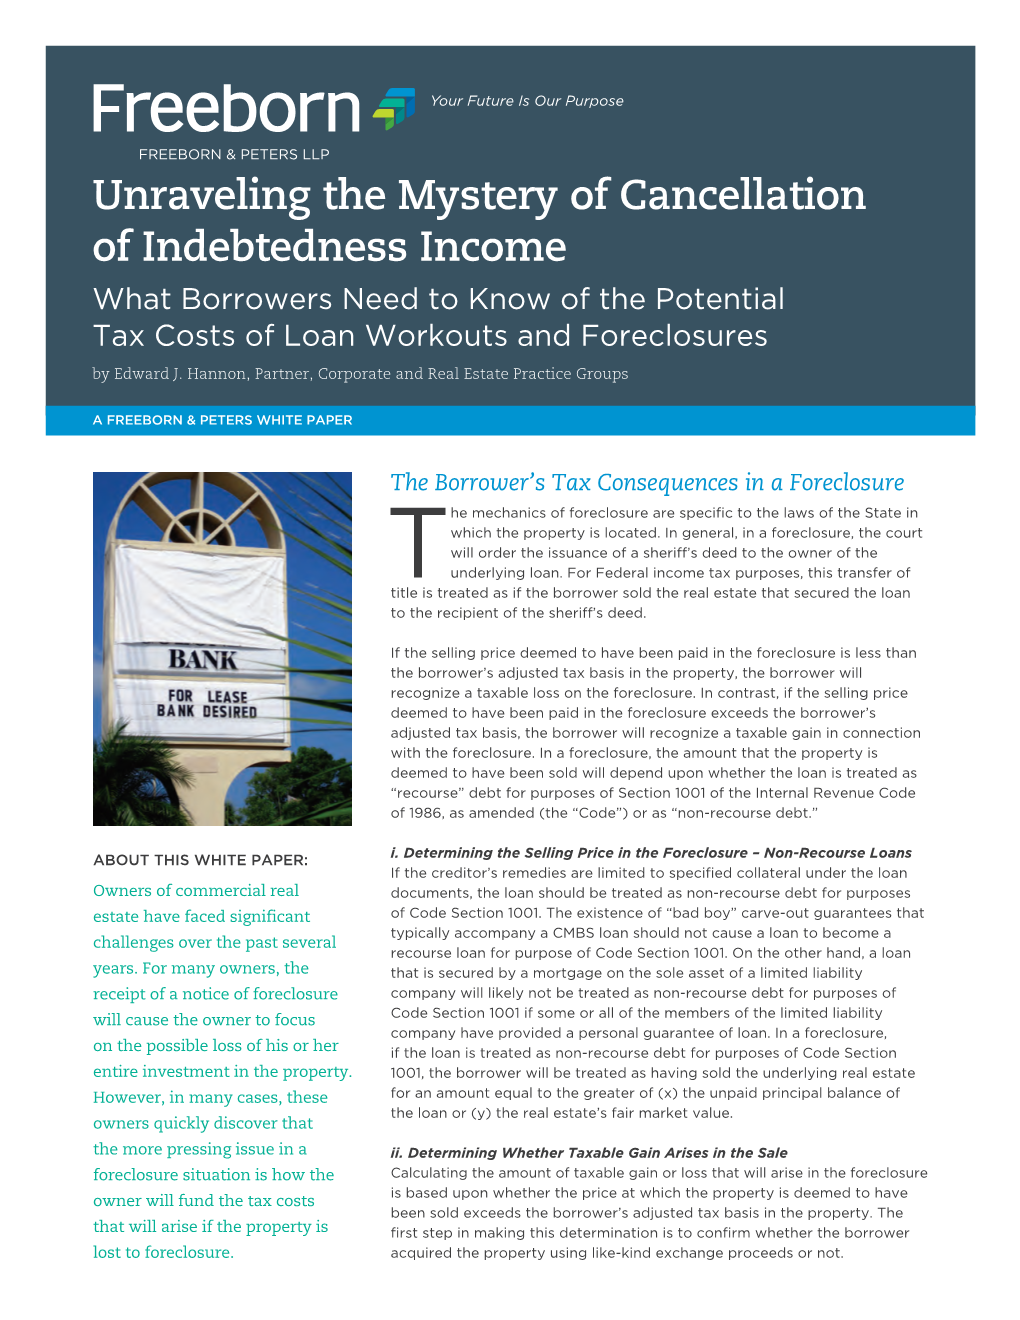 Unraveling the Mystery of Cancellation of Indebtedness Income What Borrowers Need to Know of the Potential Tax Costs of Loan Workouts and Foreclosures by Edward J